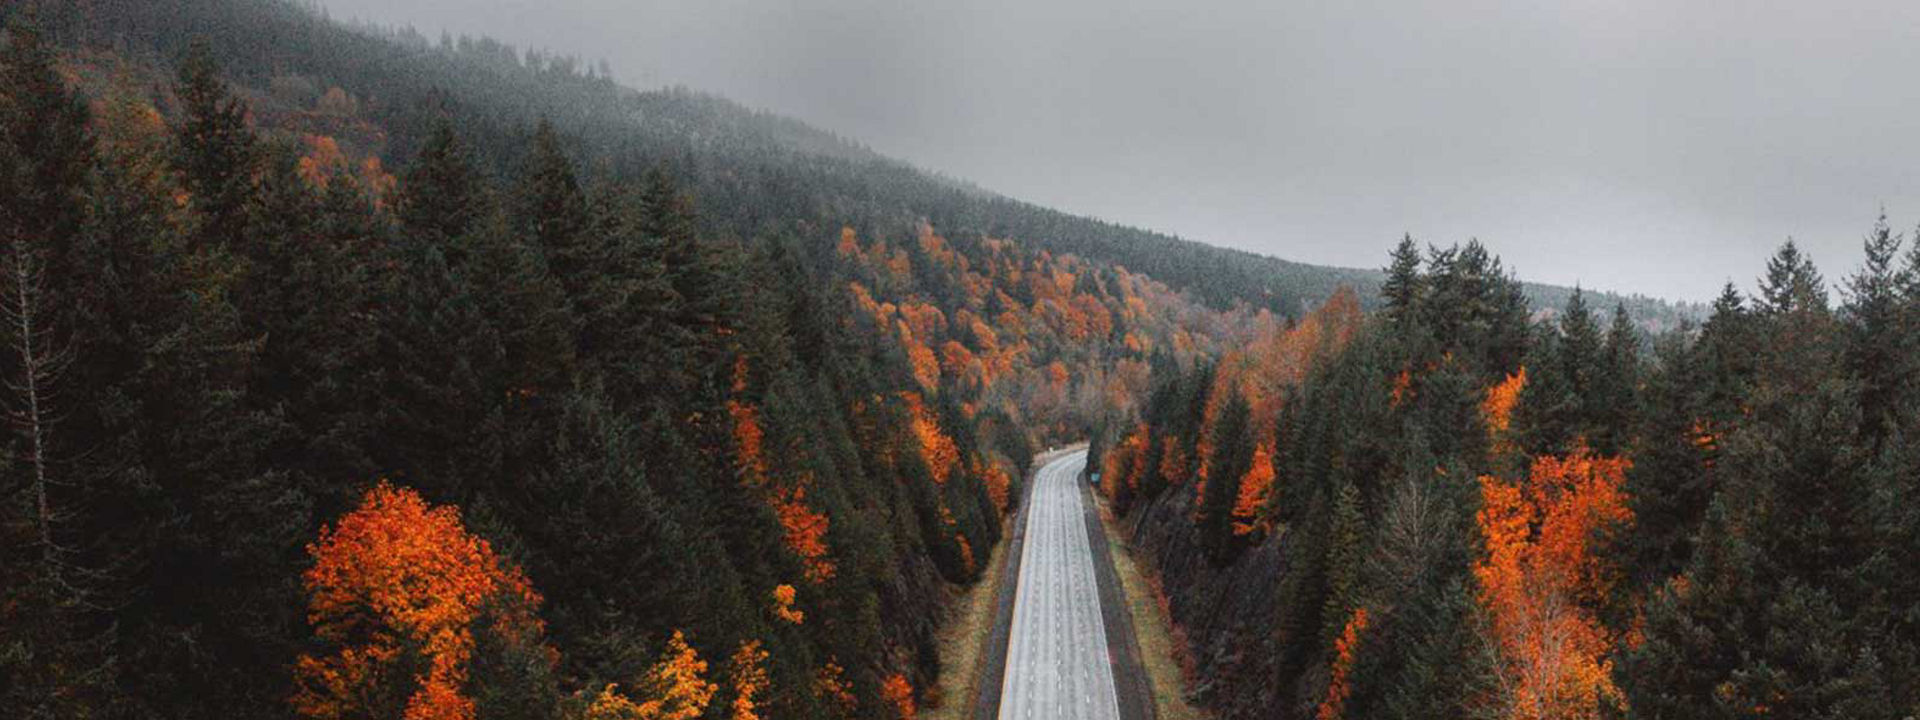 This image is of an empty highway going through a forest in the autumn season to show Weather Control is for all seasons